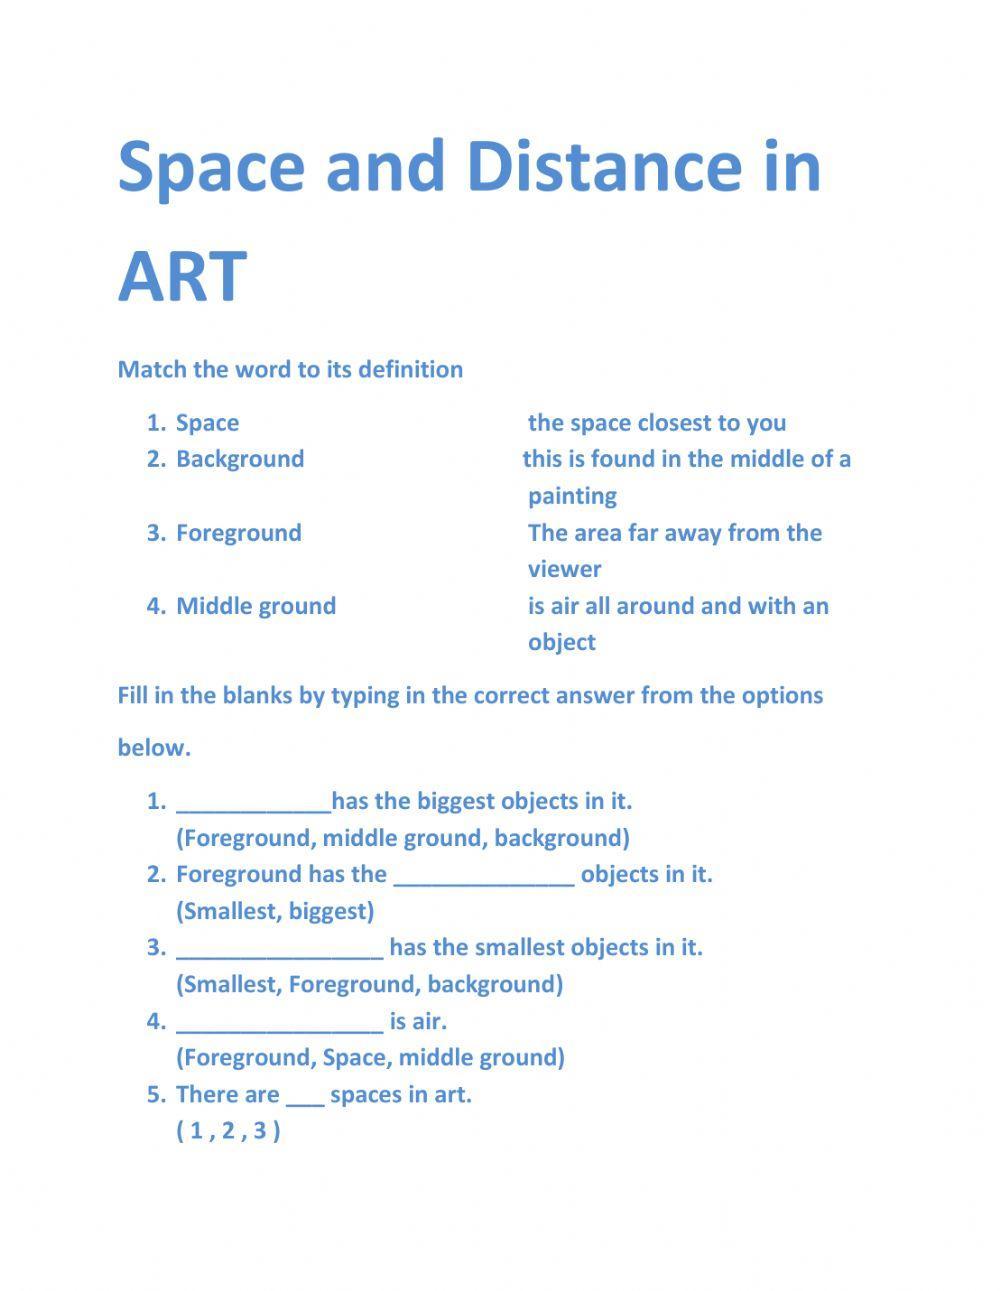 Space in art (distance)